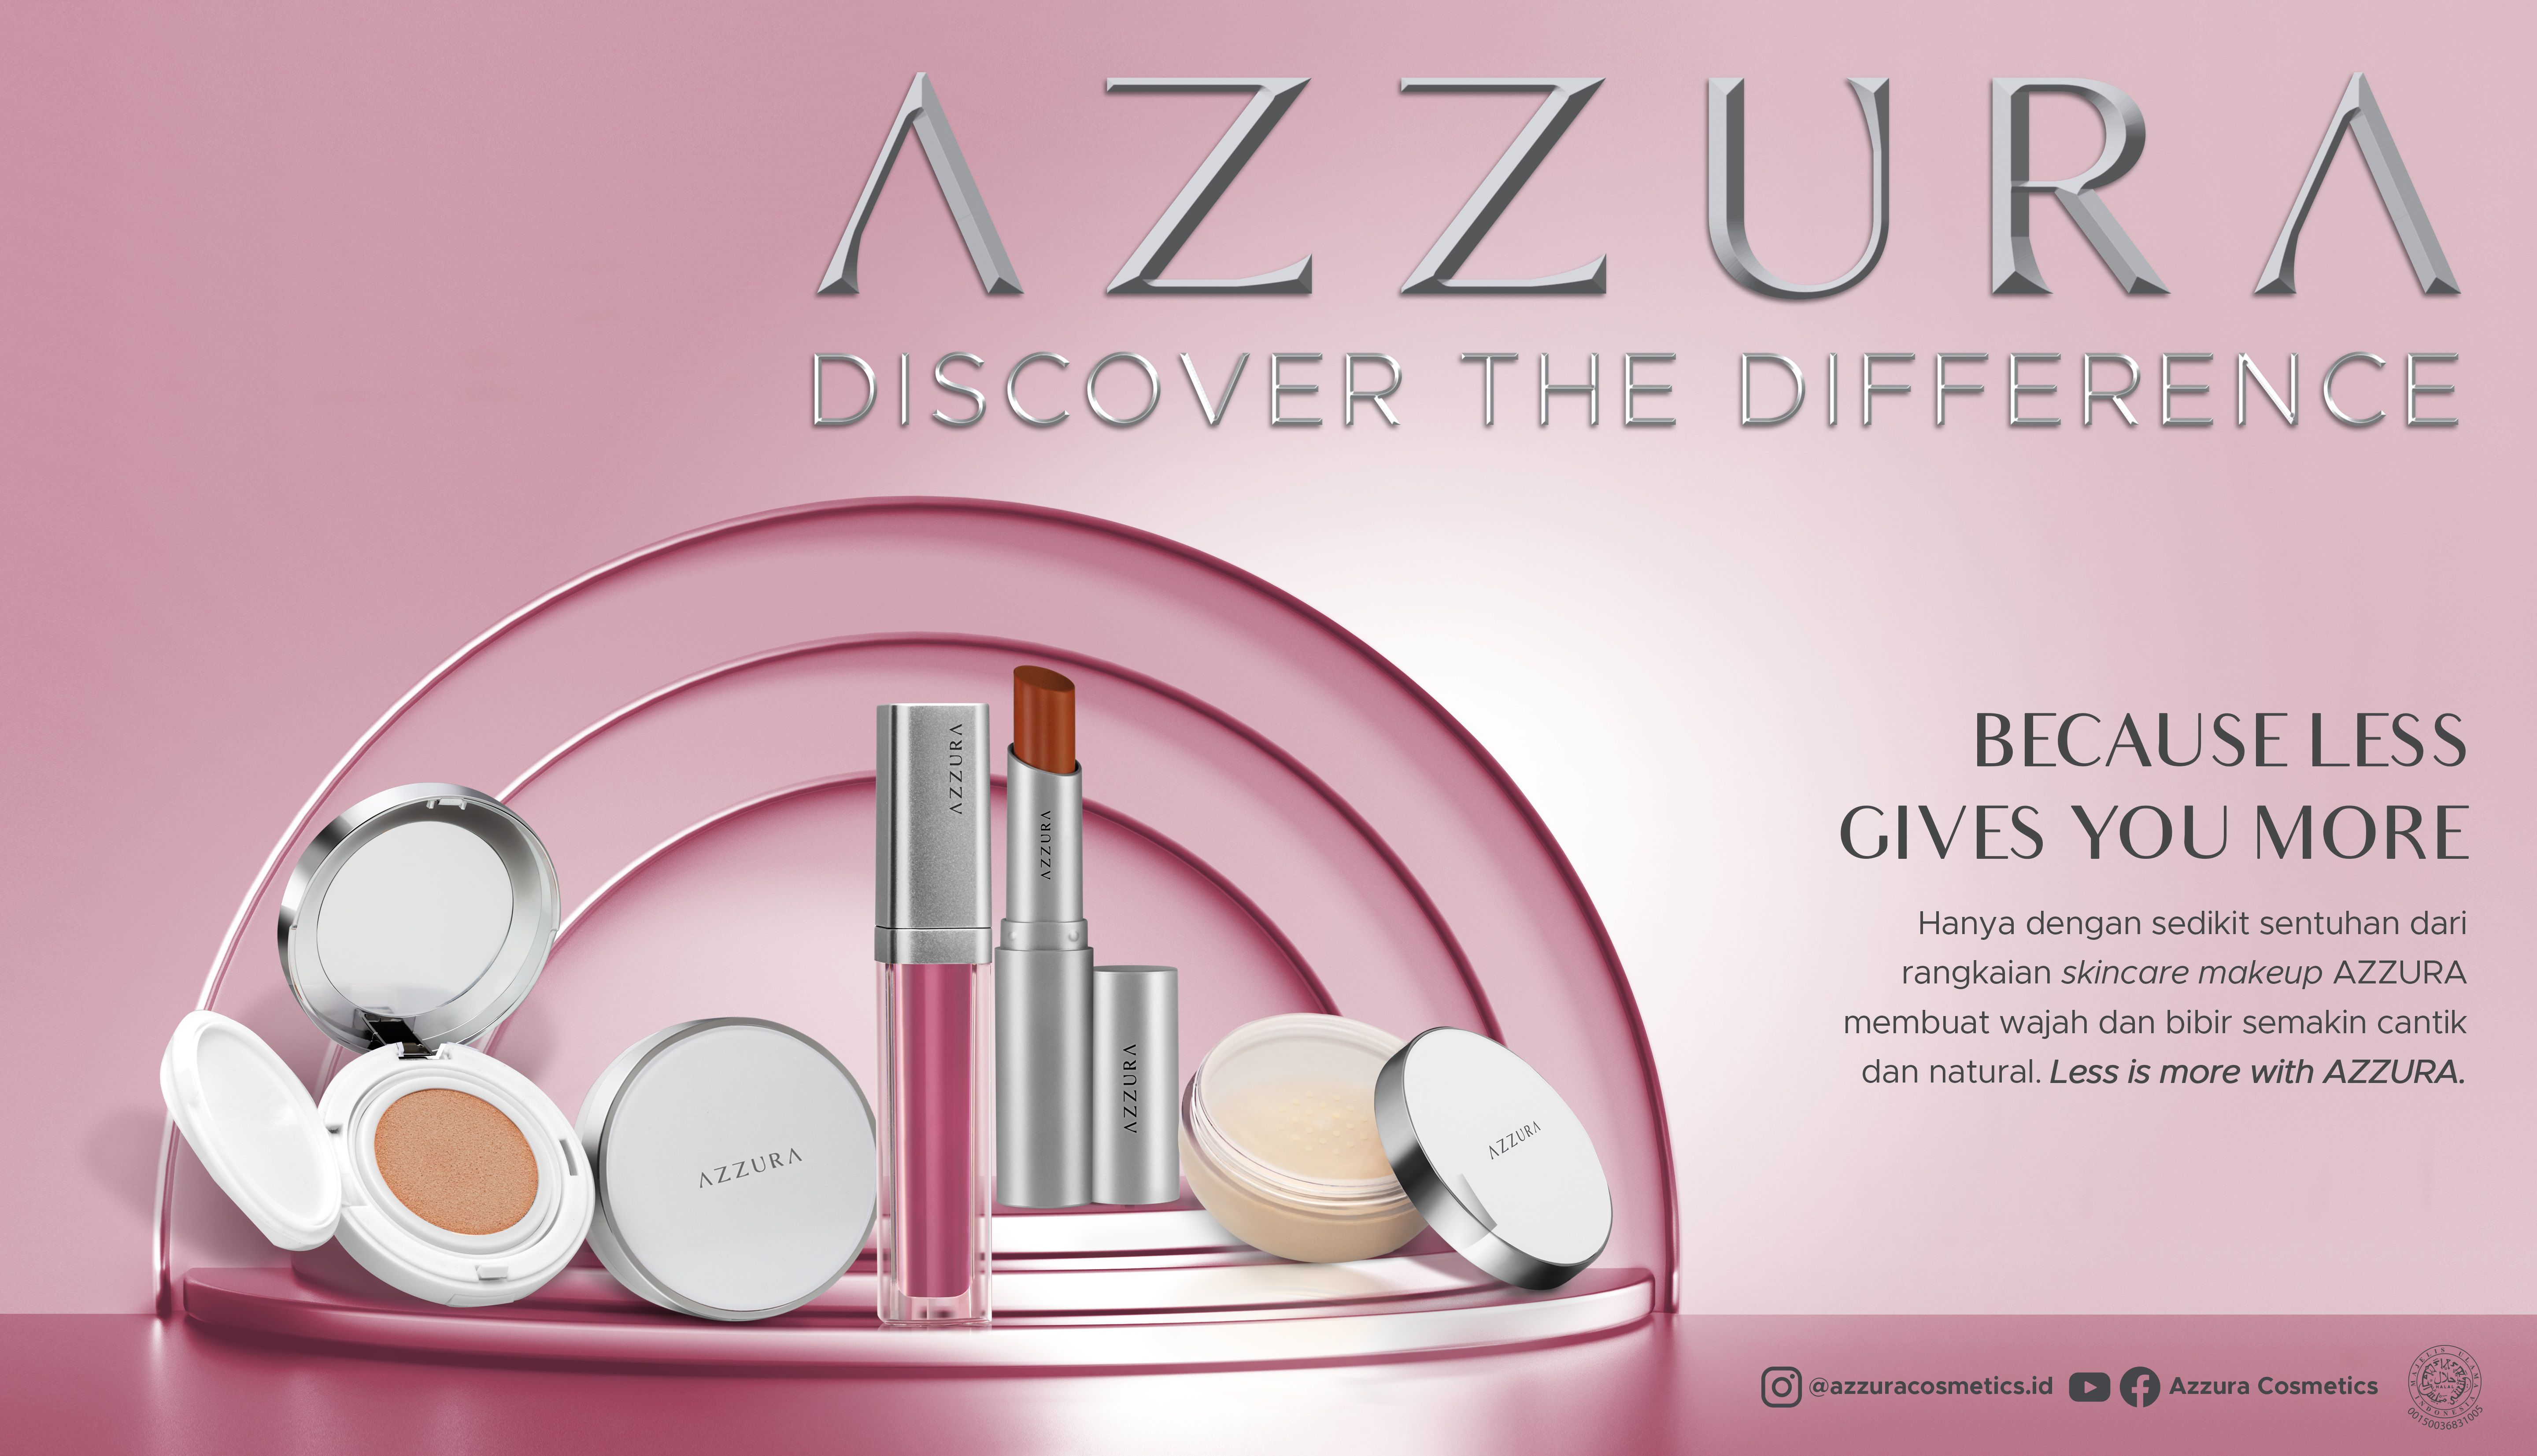 Azzura Discover The Difference